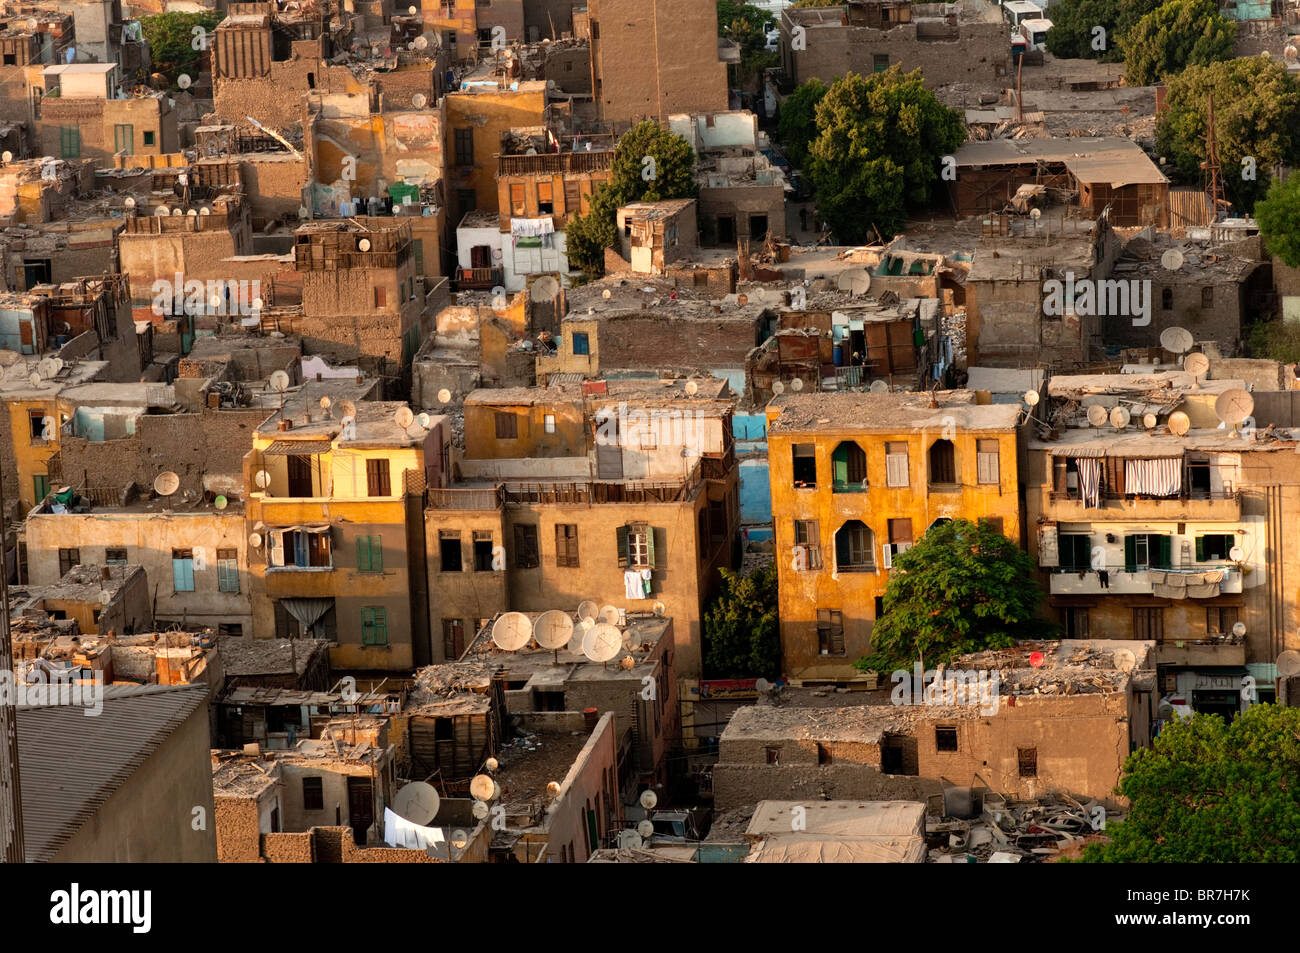 Close up evening shot of the roofs of slum housing in Cairo bristling with satellite dishes despite the poverty. Stock Photo